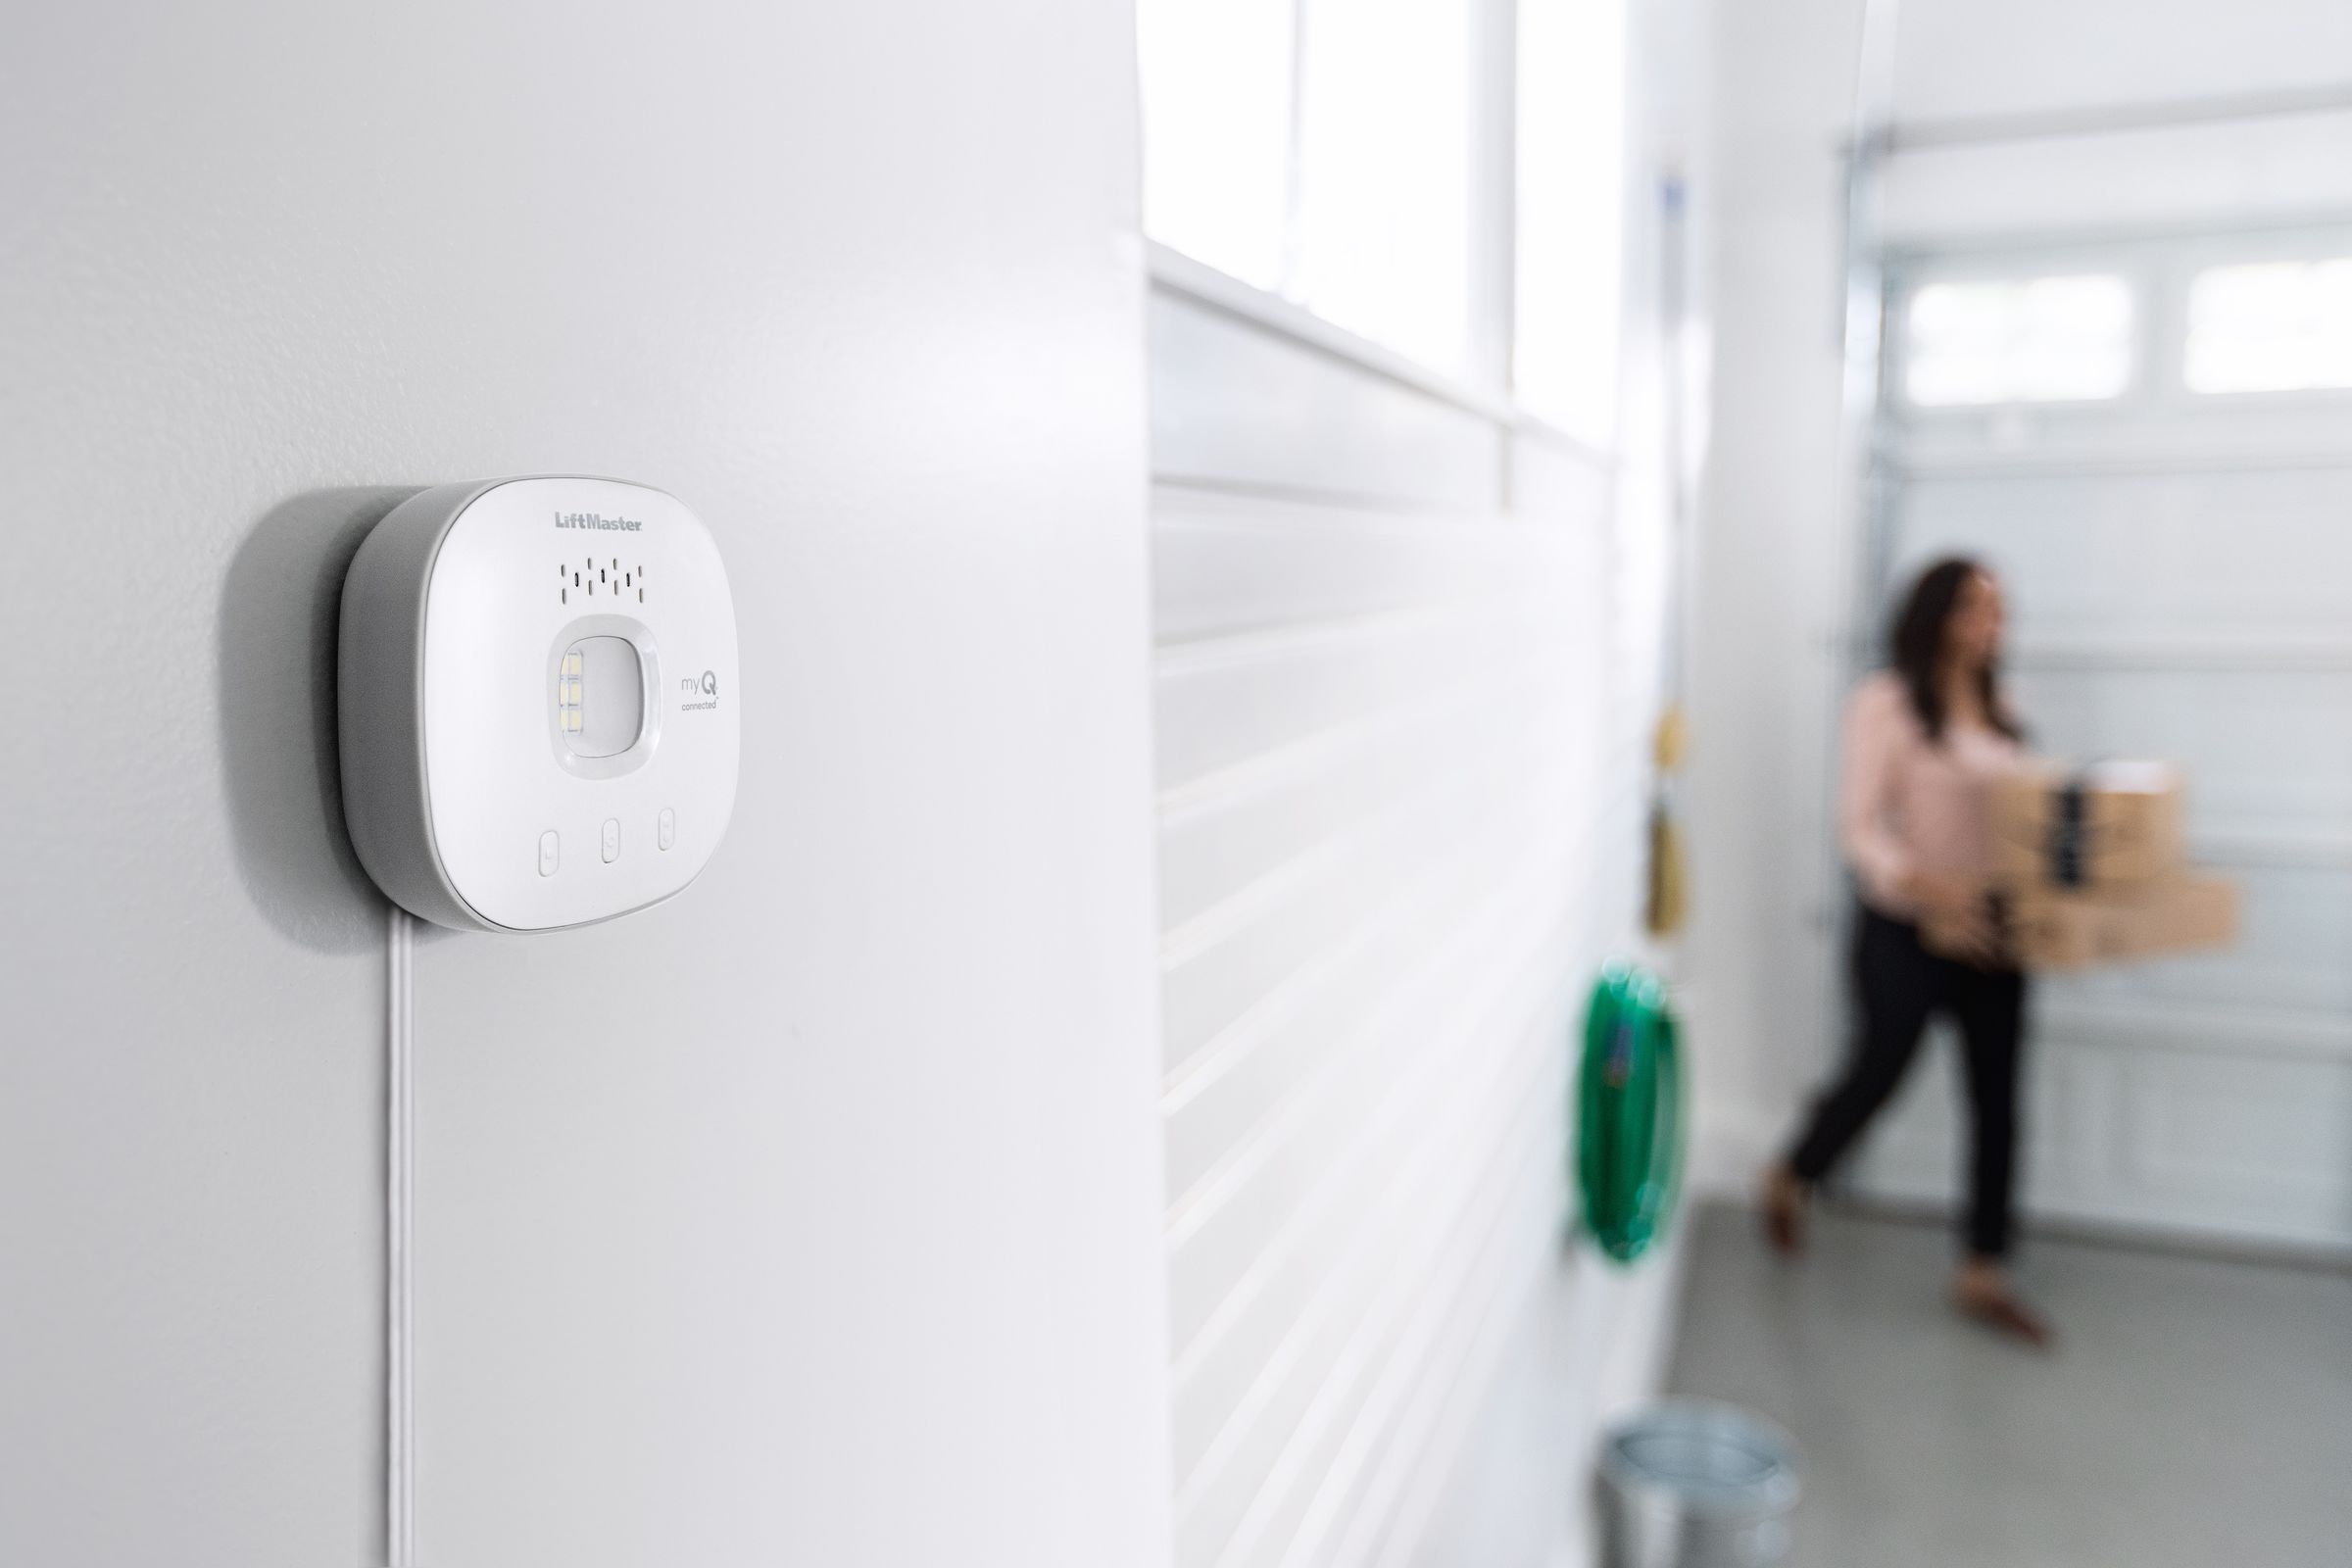 Chamberlain’s MyQ smart garage door controller allows you to open and close and monitor your door from anywhere. 